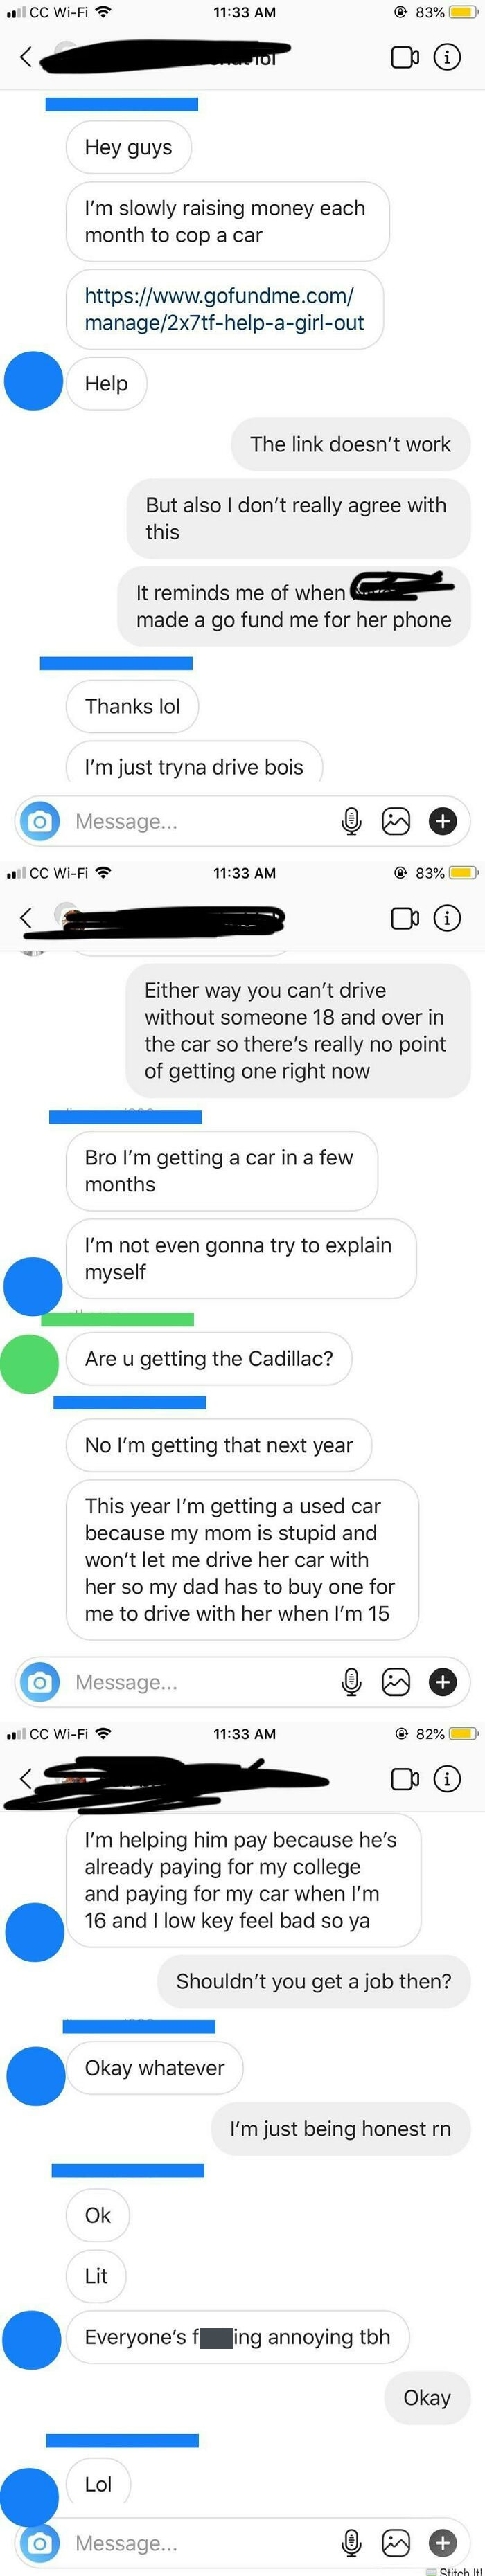 My Friend Asks Us To Donate Money Towards Her Temporary Car She’ll Use For Year Until Her Dad Buys Her A Cadillac. She Doesn’t Even Have A Permit. Shortly After This She Left Our Group Chat And Made A Post On How Annoying People Are. Blue Is Her And Green Is The Other Person In Our Group Chat